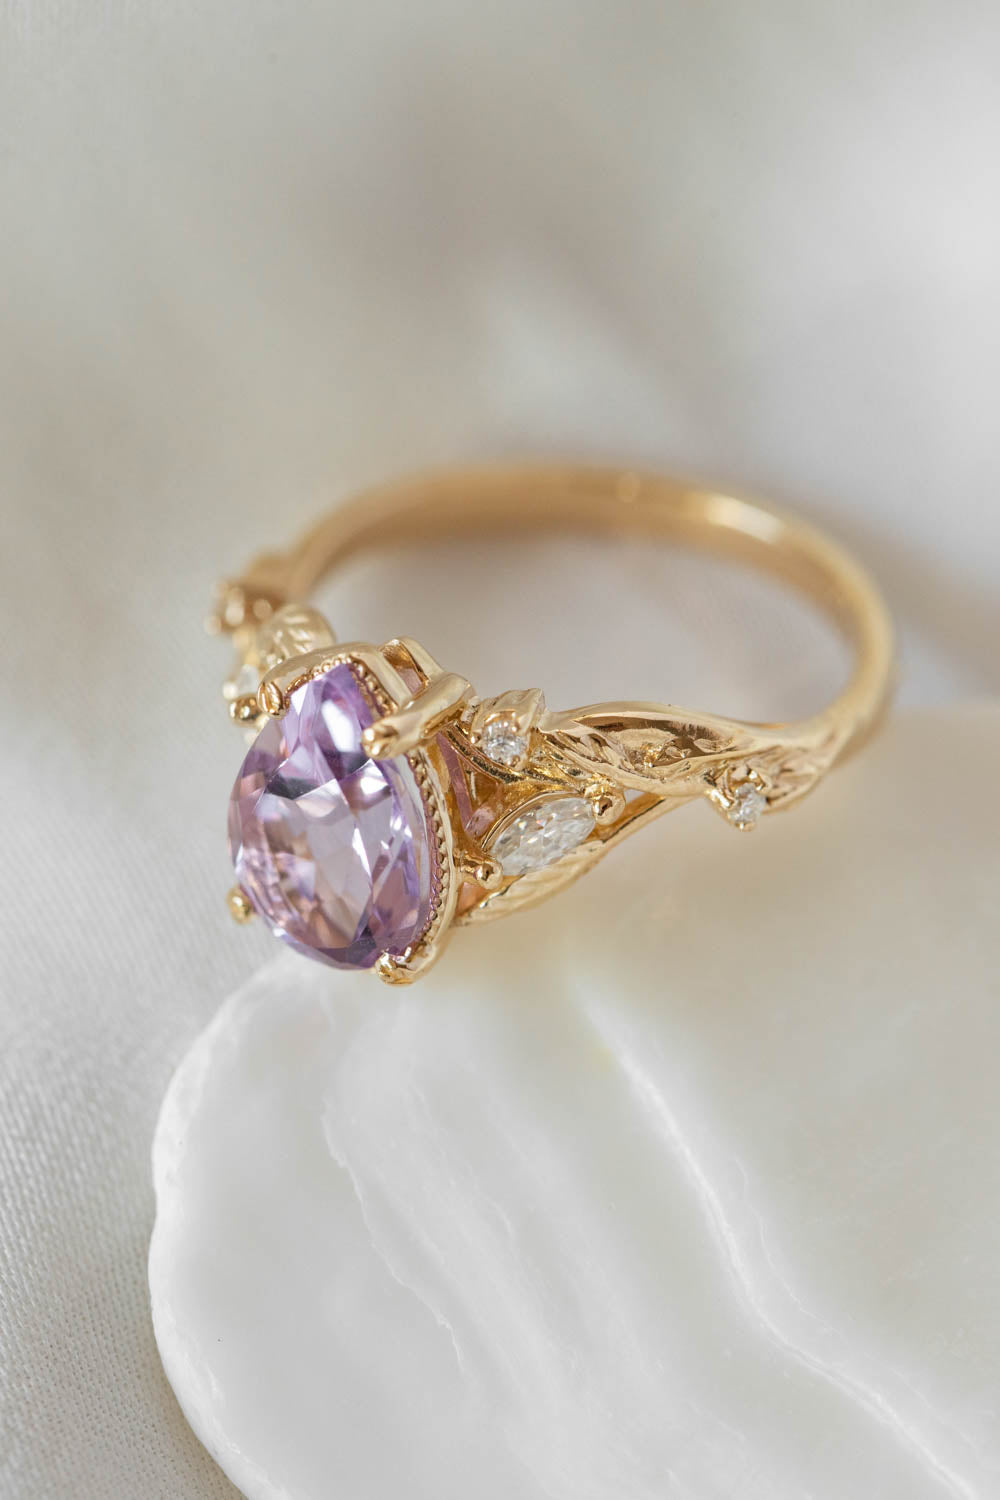 Lavender amethyst nature themed engagement ring, big pear cut gemstone gold  ring with diamonds / Patricia